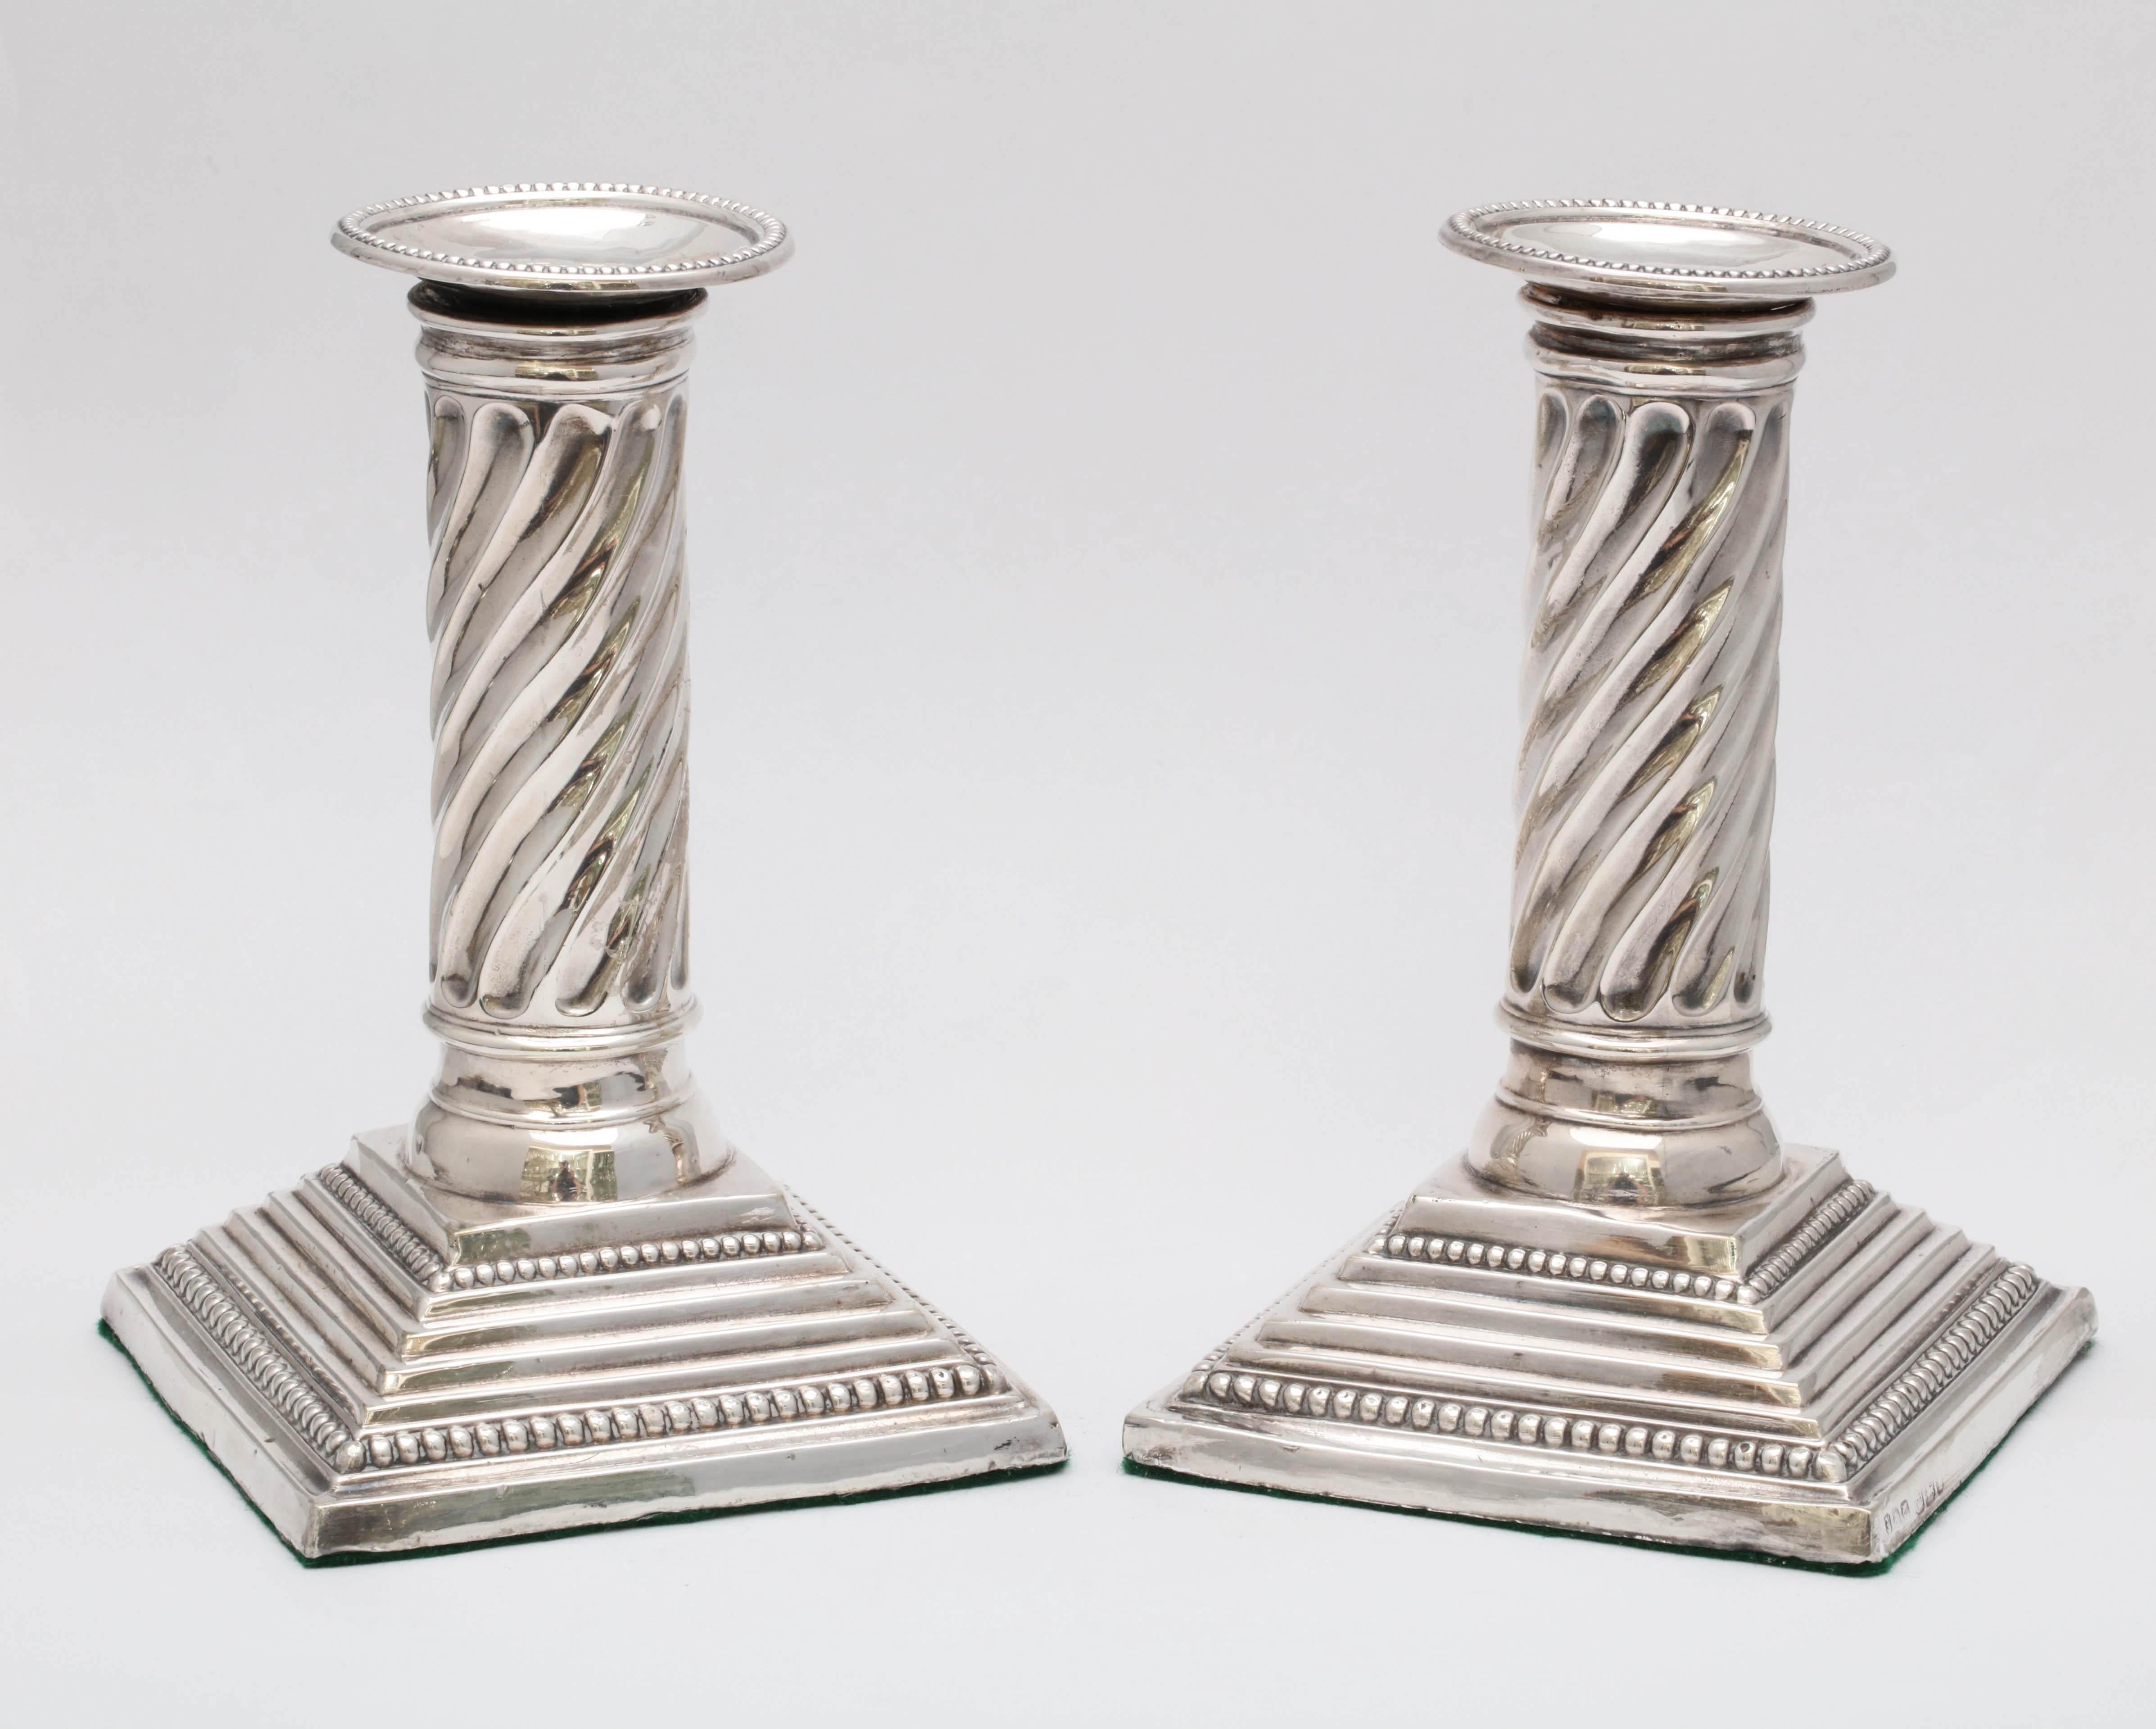 Unusual, Victorian, sterling silver, neoclassical style, spiral column-form candlesticks, Sheffield, England, 1898, Jenkins and Timm - makers. Weighted. 6 1/2 inches high x 3 1/2 inches deep (at deepest point) x 3 1/2 inches wide (at widest point.